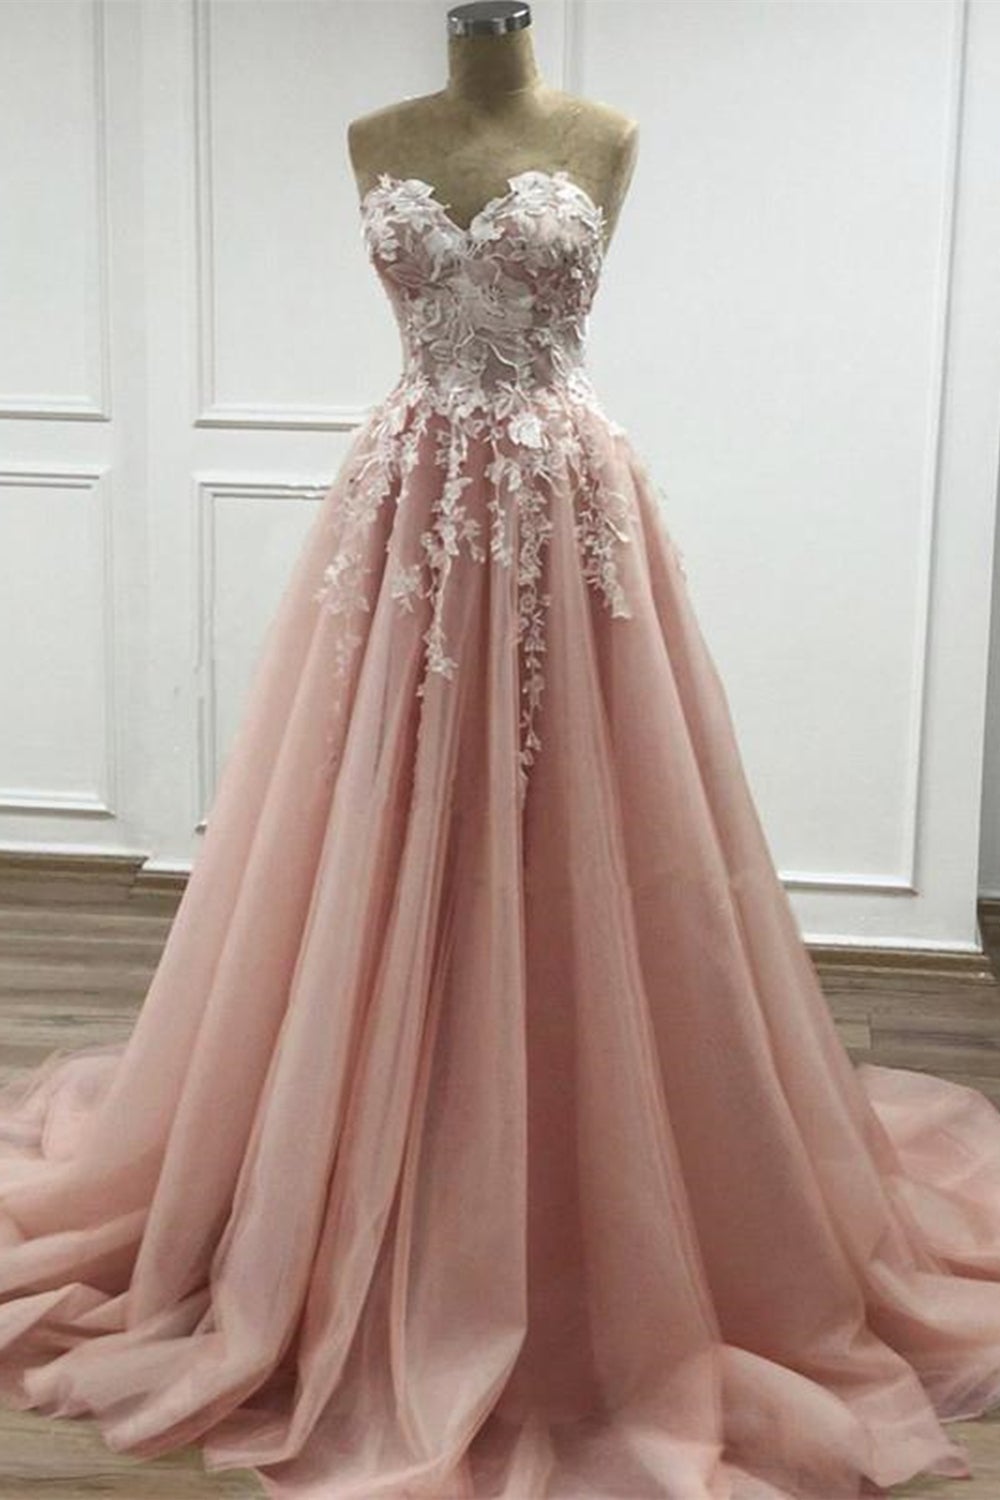 Homecoming Dress Simple, Strapless Sweetheart Neck Pink Lace Appliques Long Prom Dress,Floral Formal Dress,Fashion Evening Dresses